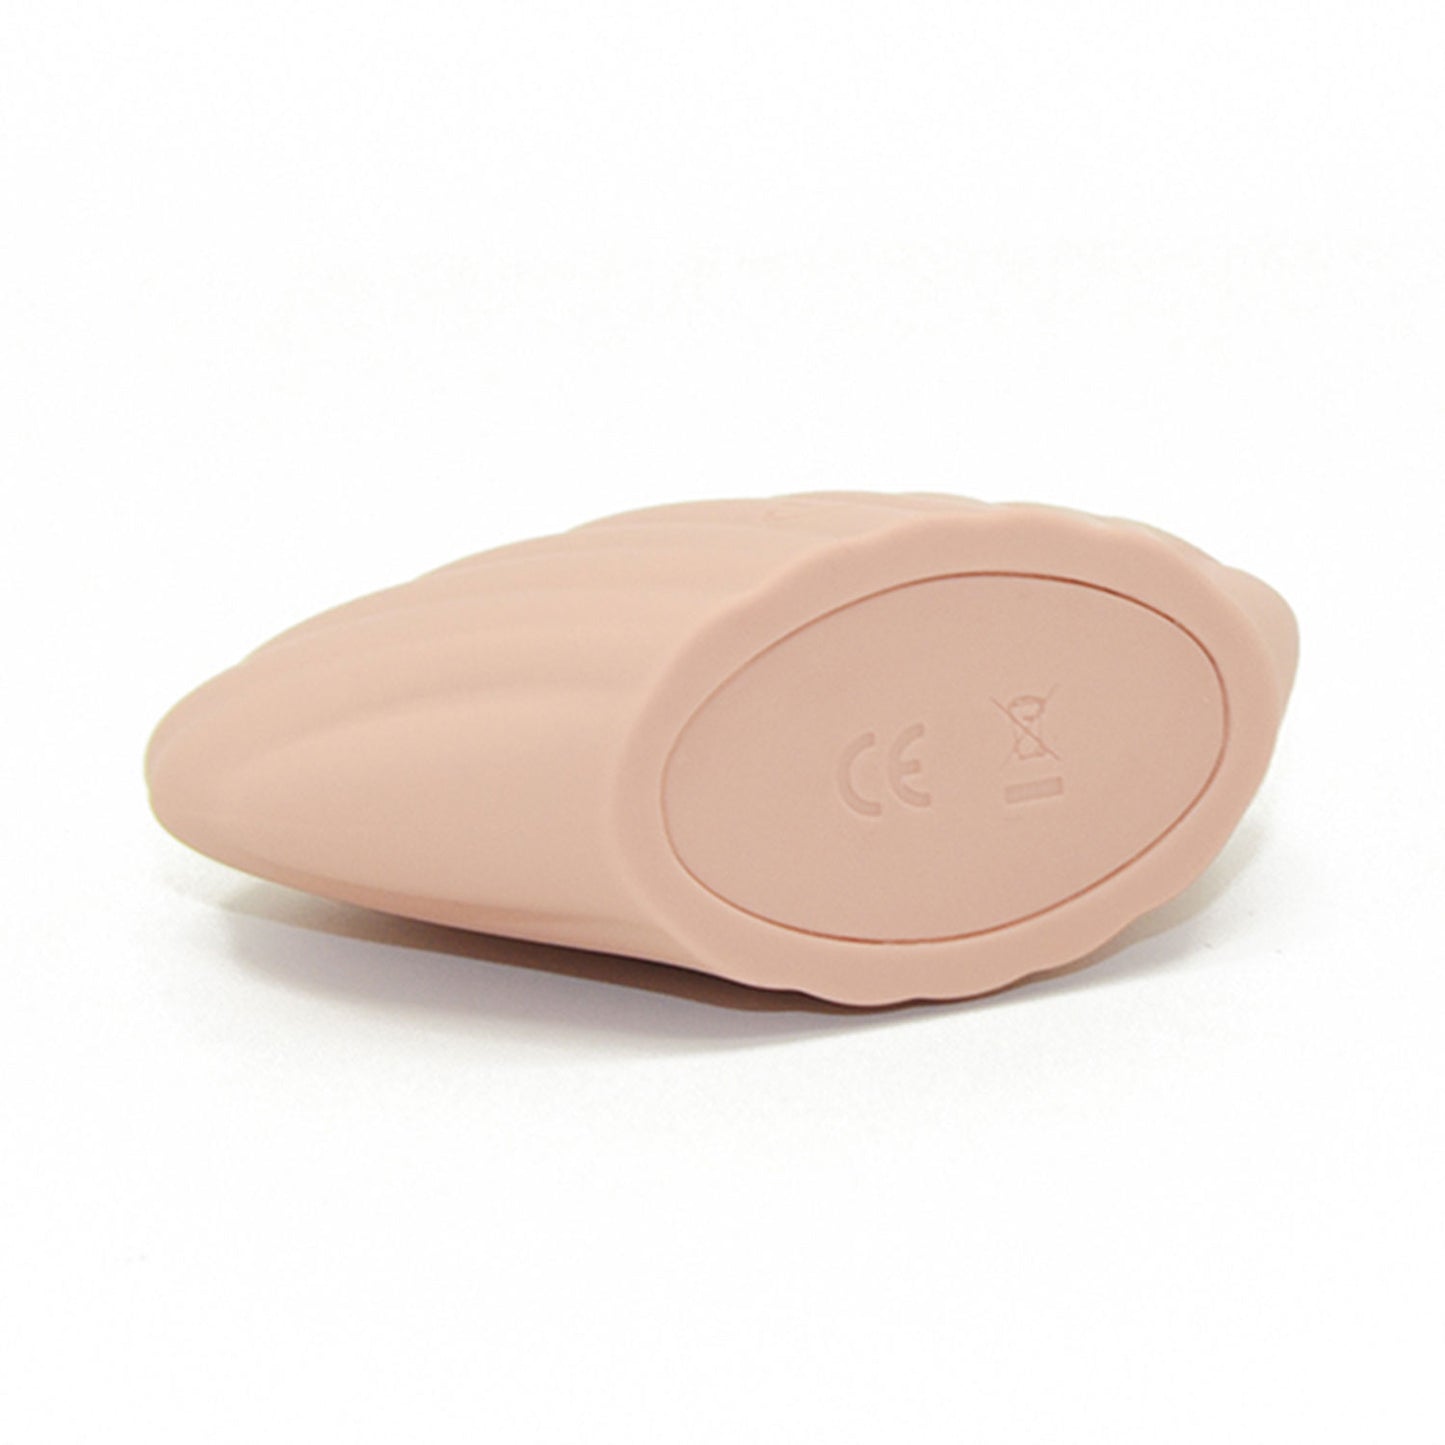 The Horny Company - Blush Blossom Collection Rechargeable Mermaid Vibrating Seashell Massager